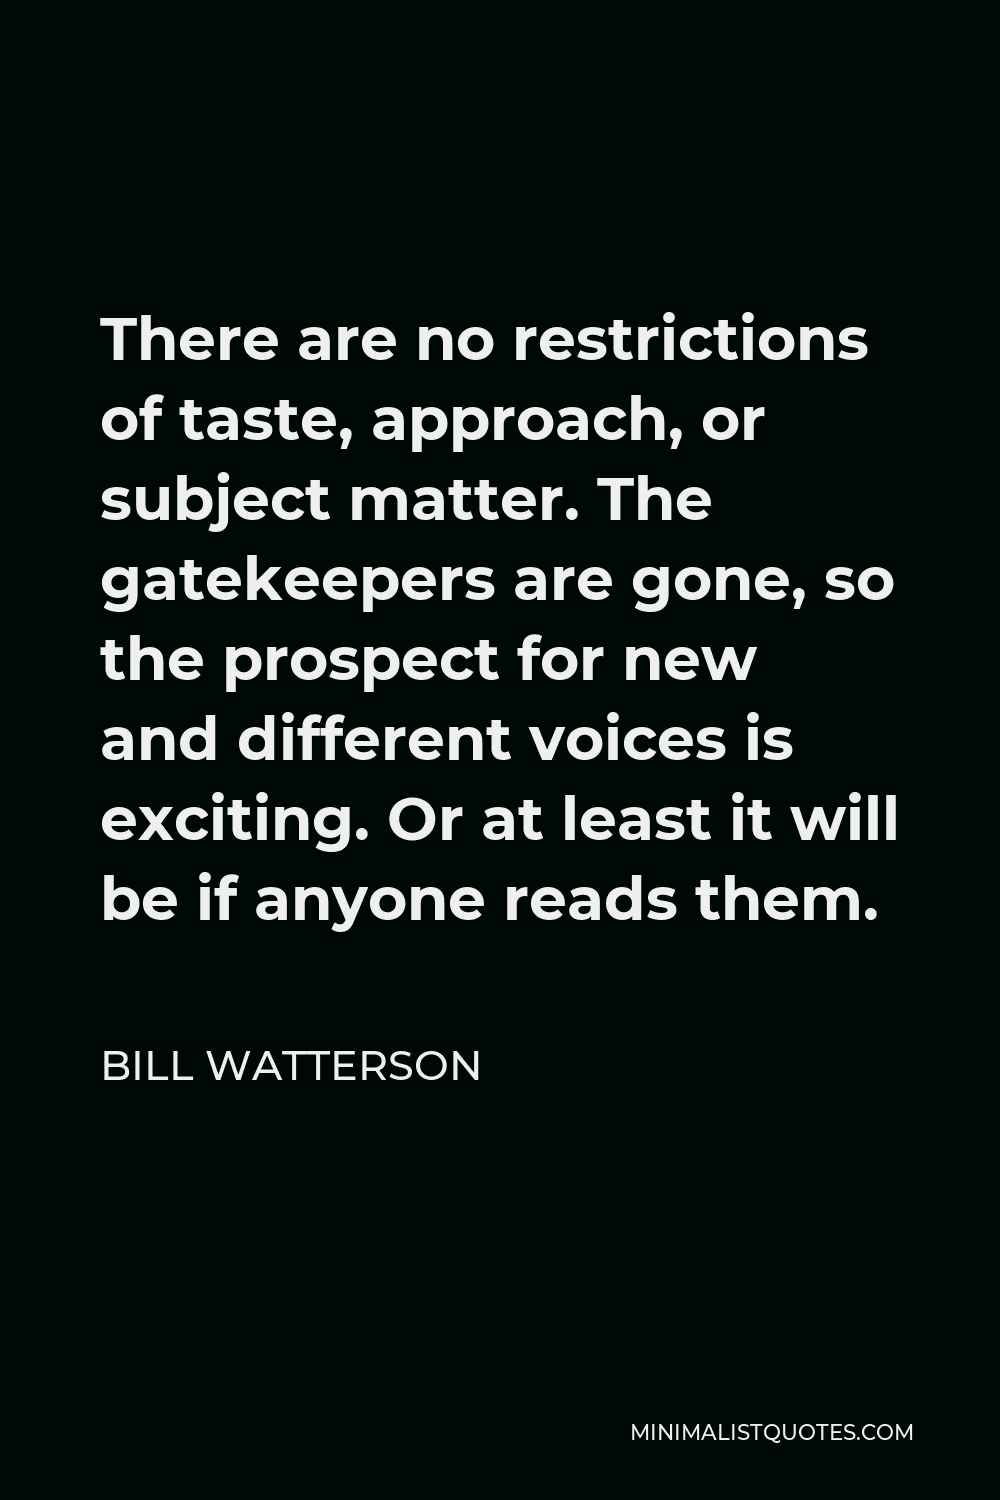 Bill Watterson Quote - There are no restrictions of taste, approach, or subject matter. The gatekeepers are gone, so the prospect for new and different voices is exciting. Or at least it will be if anyone reads them.